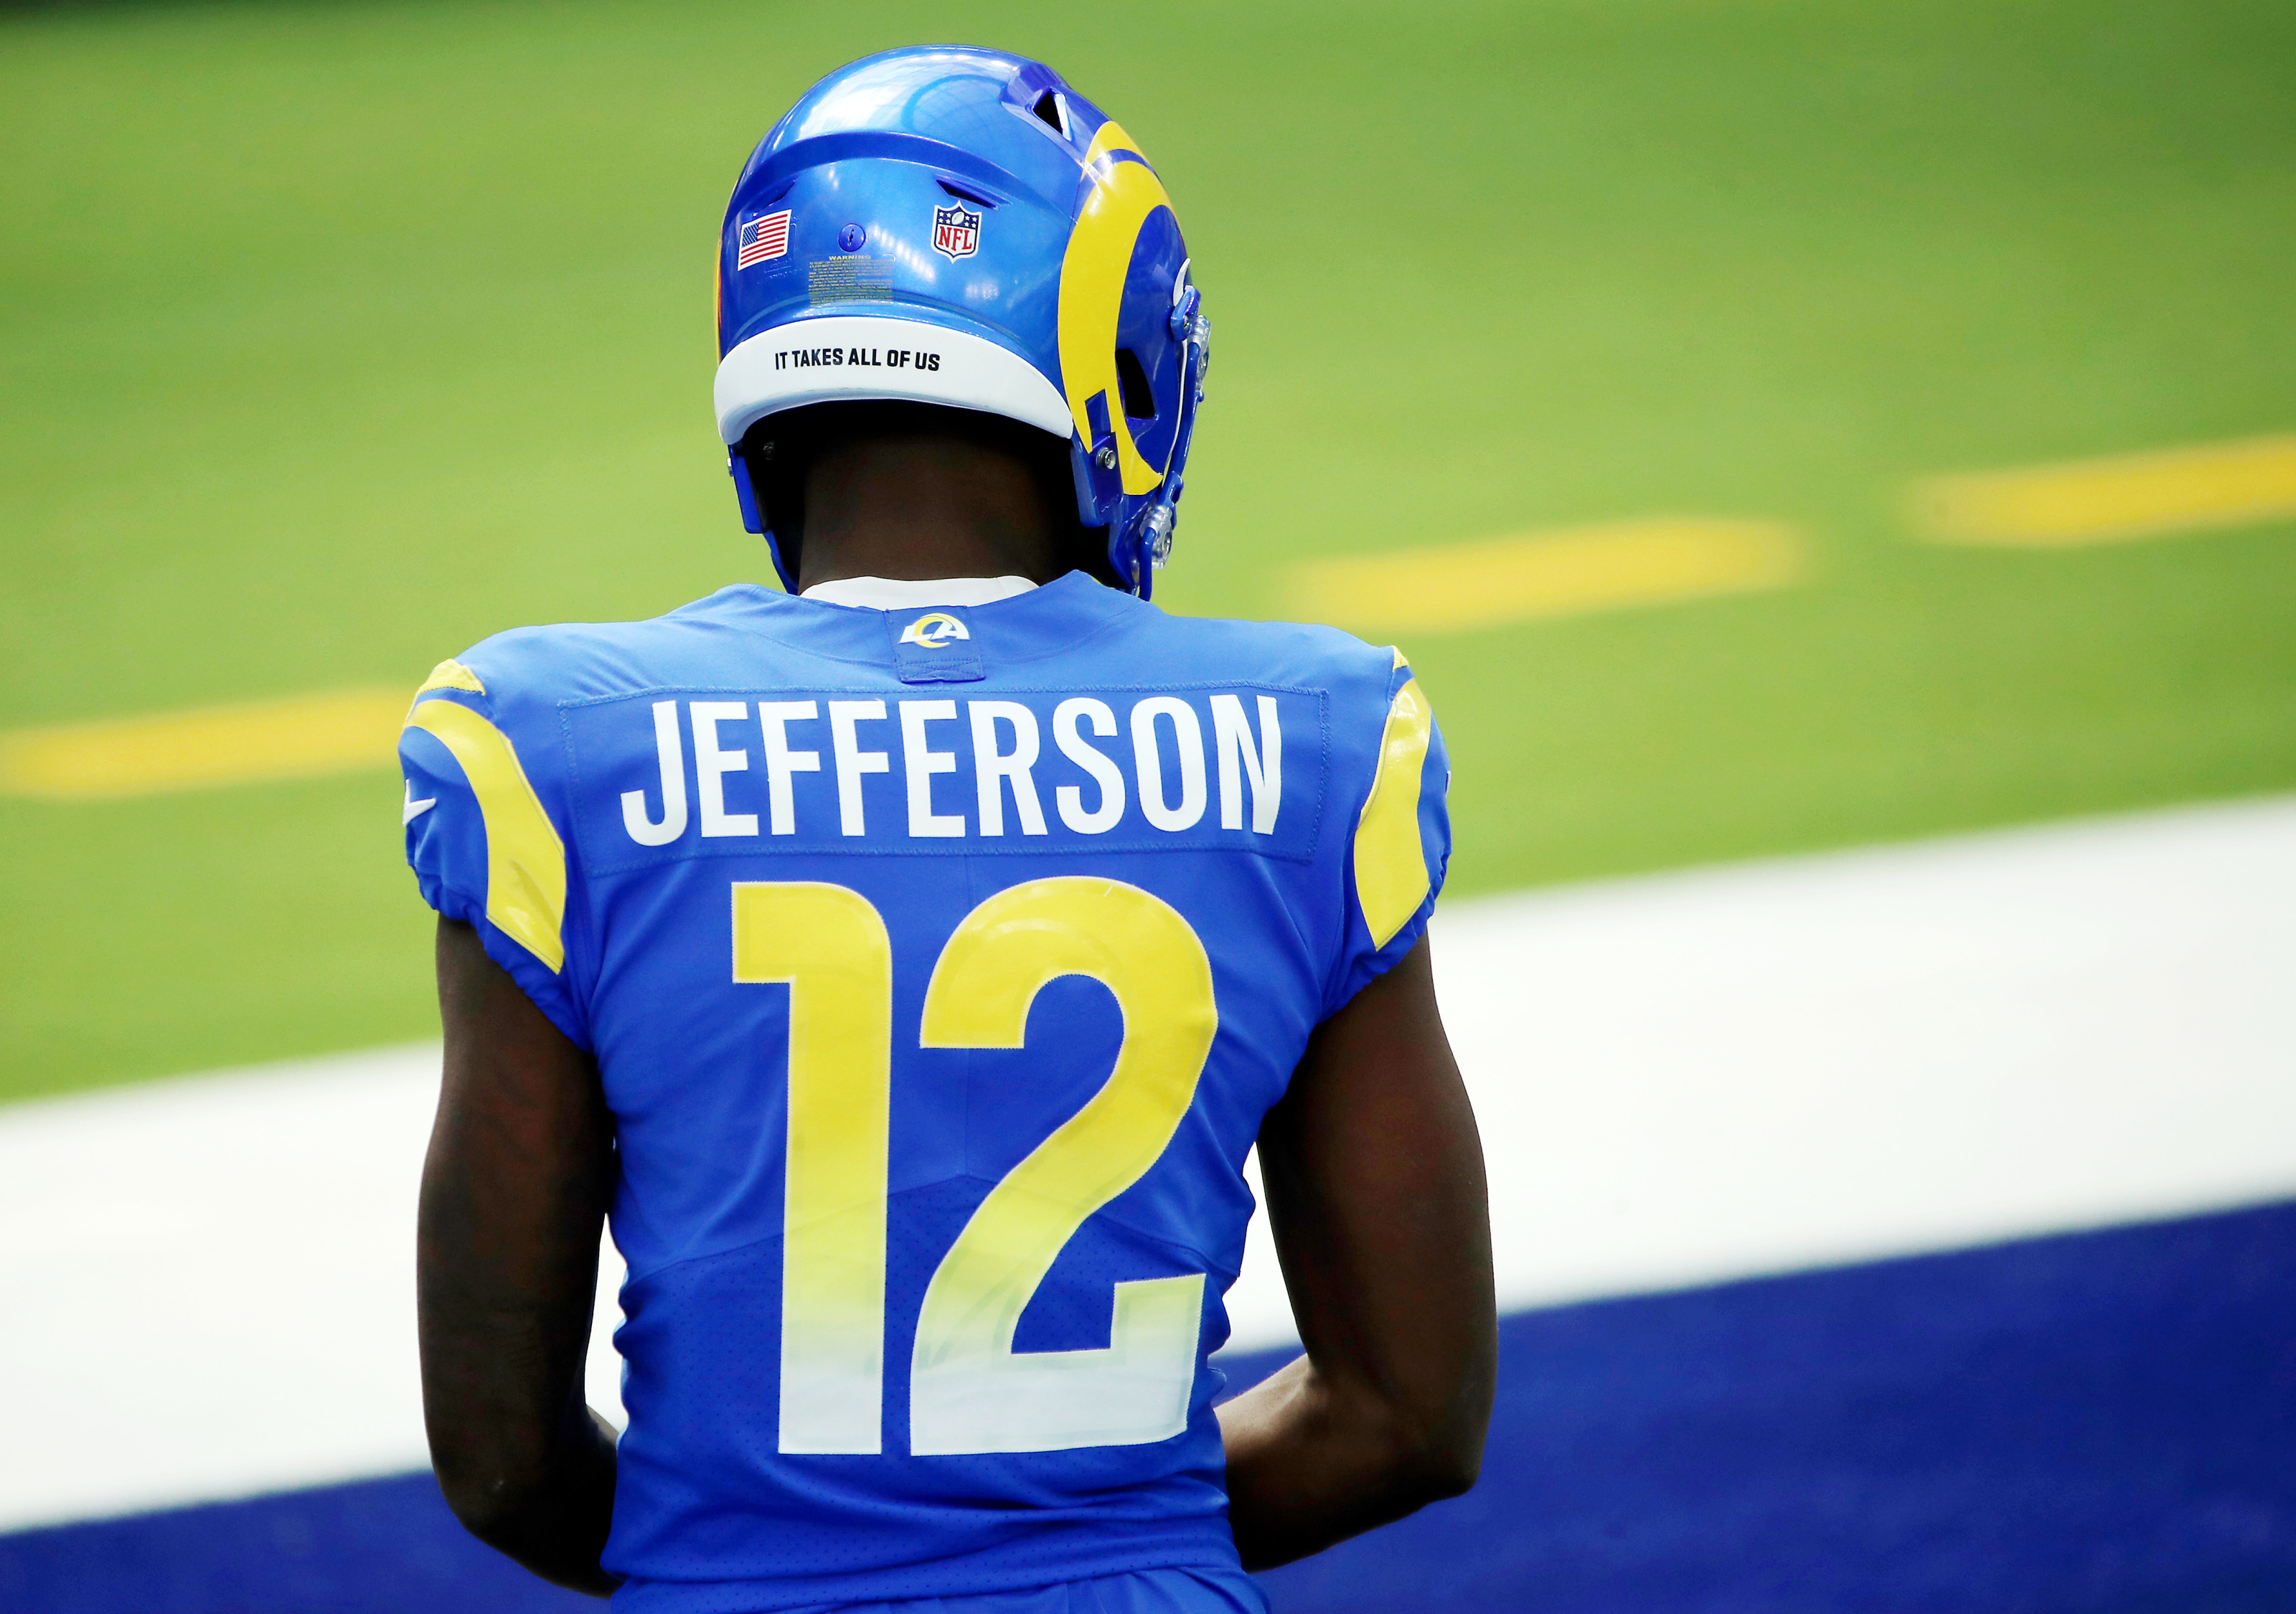 Van Jefferson will be a breakout player for the Los Angeles Rams